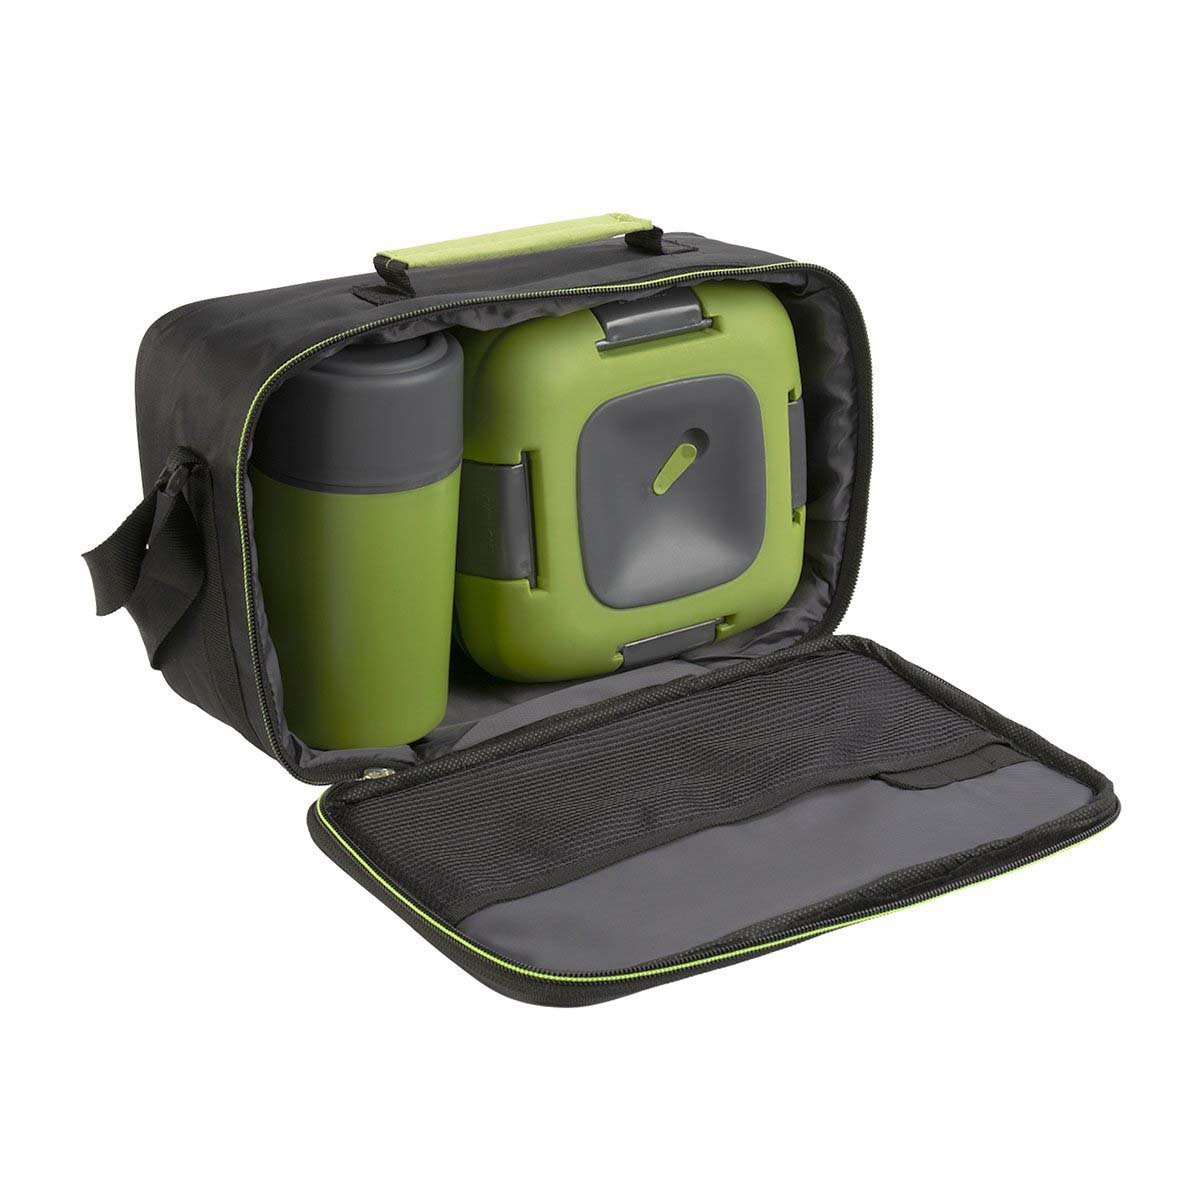 Paloma Green Set of Plastic Lunch Box with 20 oz Bottle | Insulated Bag